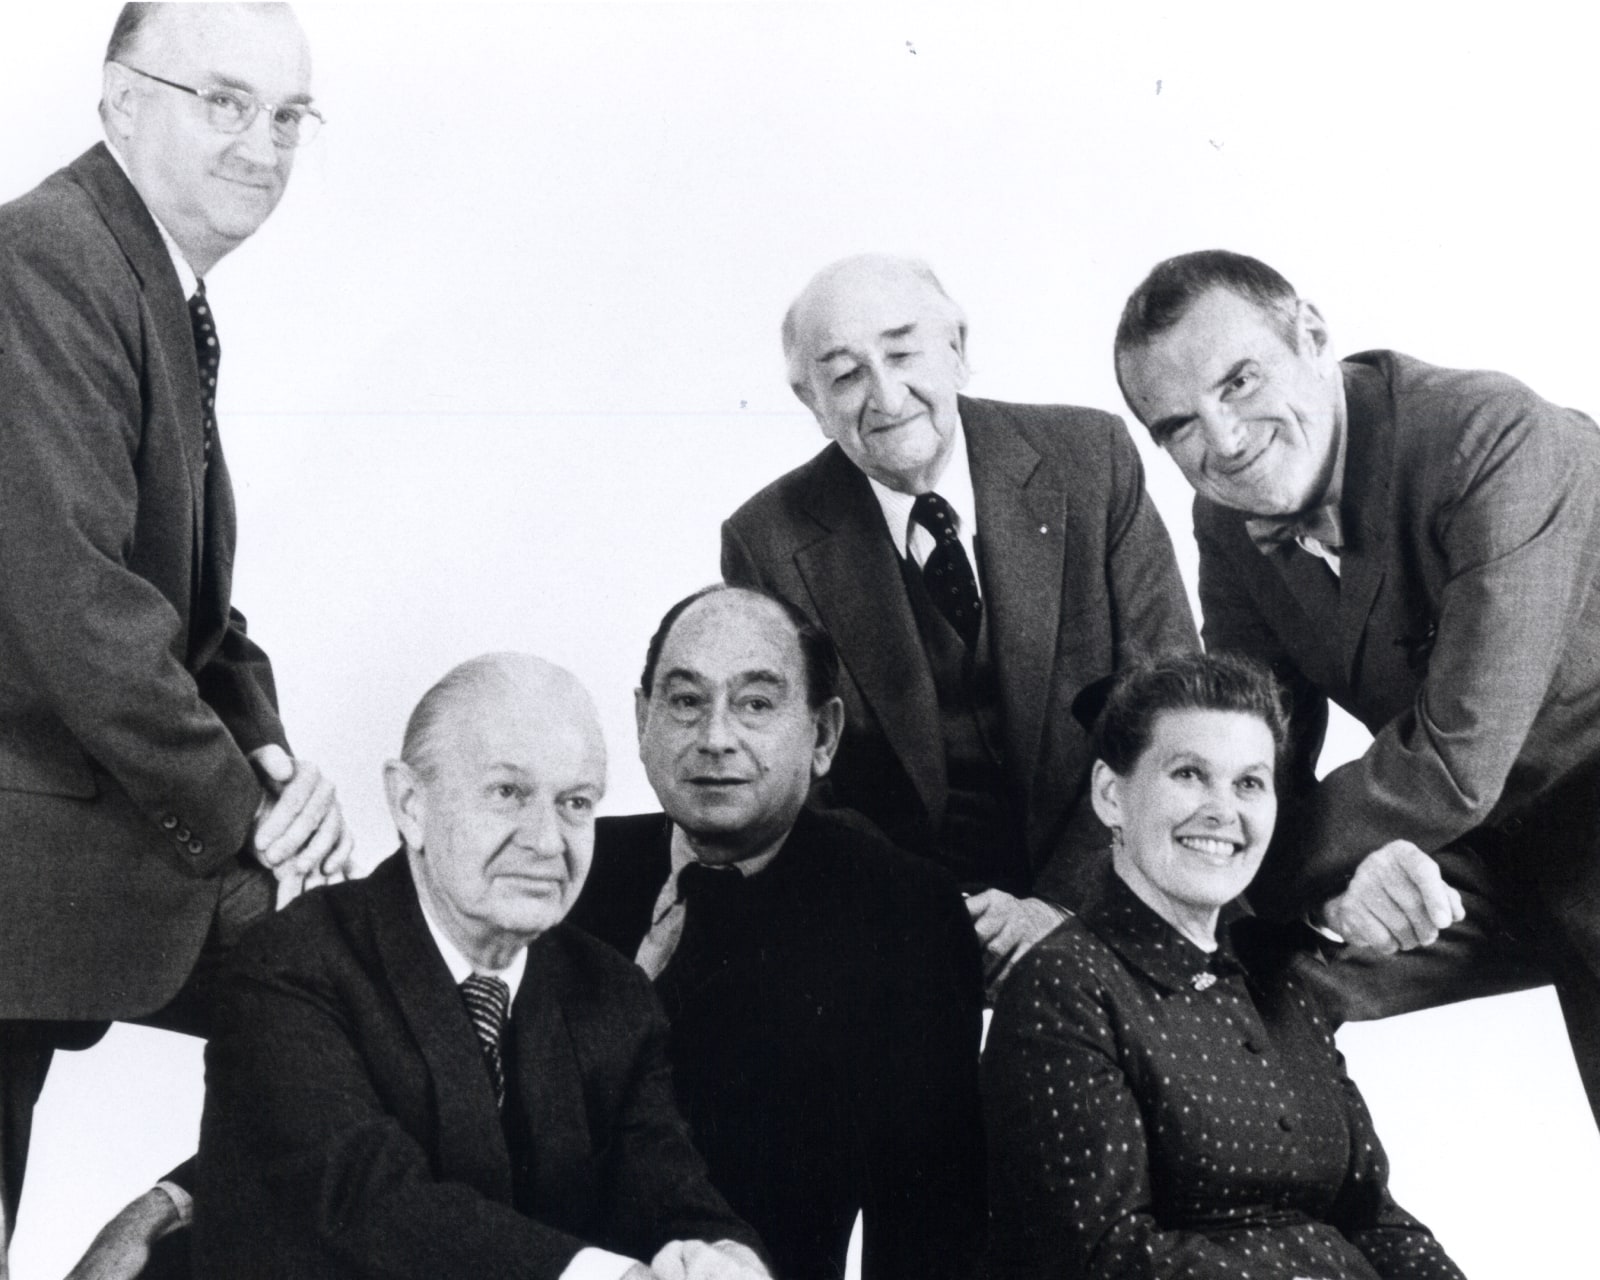 Founder D.J. De Pree, design director George Nelson, and designers Robert Propst, Alexander Girard, and Ray and Charles Eames.